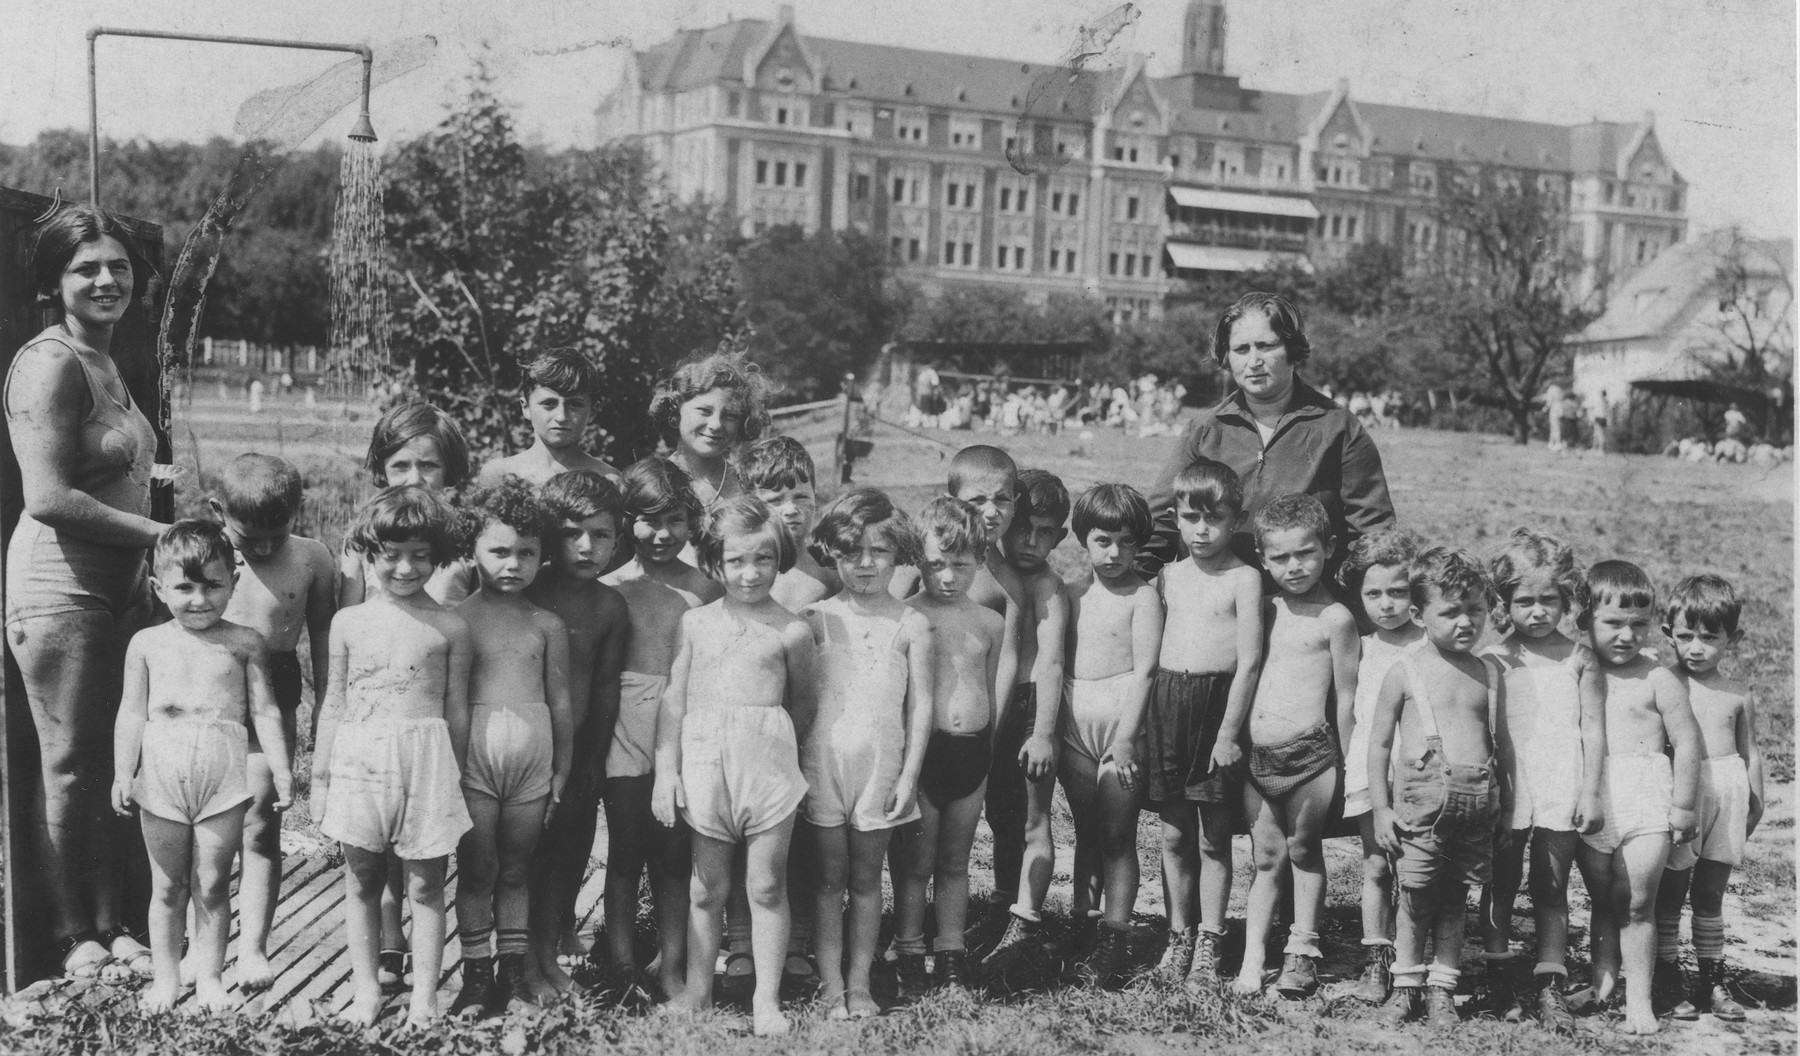 Group portrait of children in a summer camp on the outskirts of Vienna.

Carl Roman is pictured in the first row, center, eighth from the left.